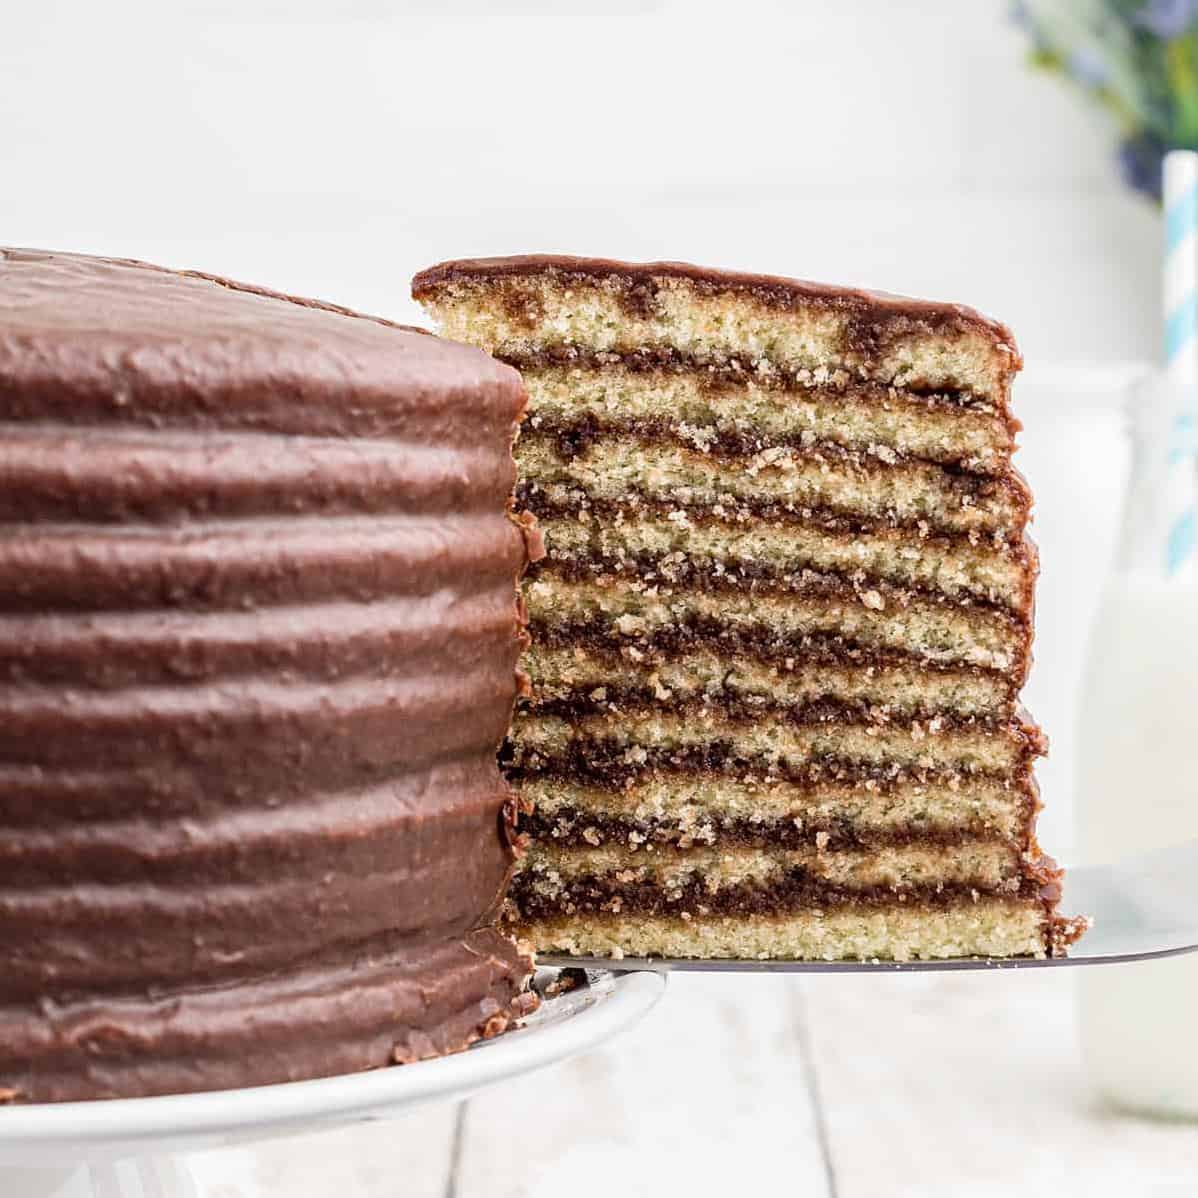  Celebrate any occasion with this show-stopping cake.